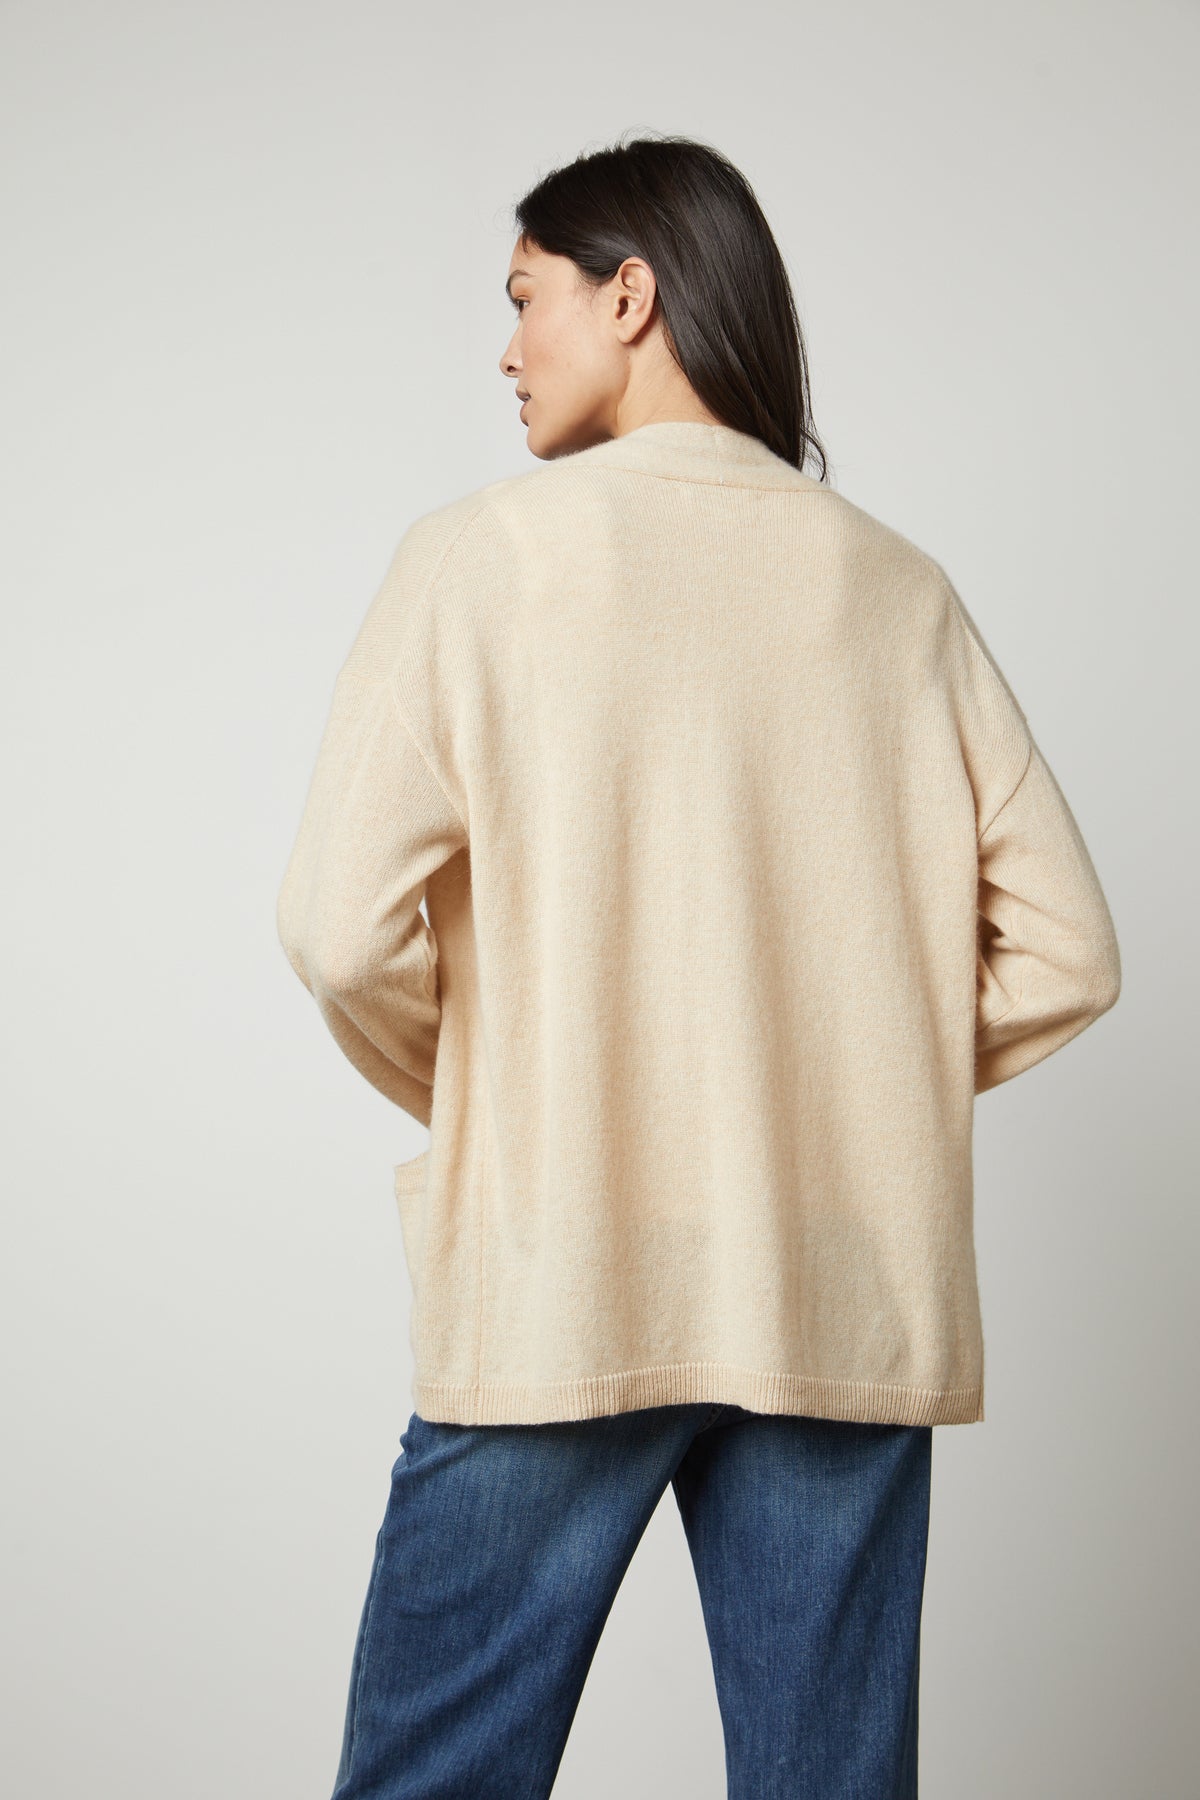 The back view of a woman wearing a Velvet by Graham & Spencer LILA CASHMERE CARDIGAN and jeans.-26910345887937